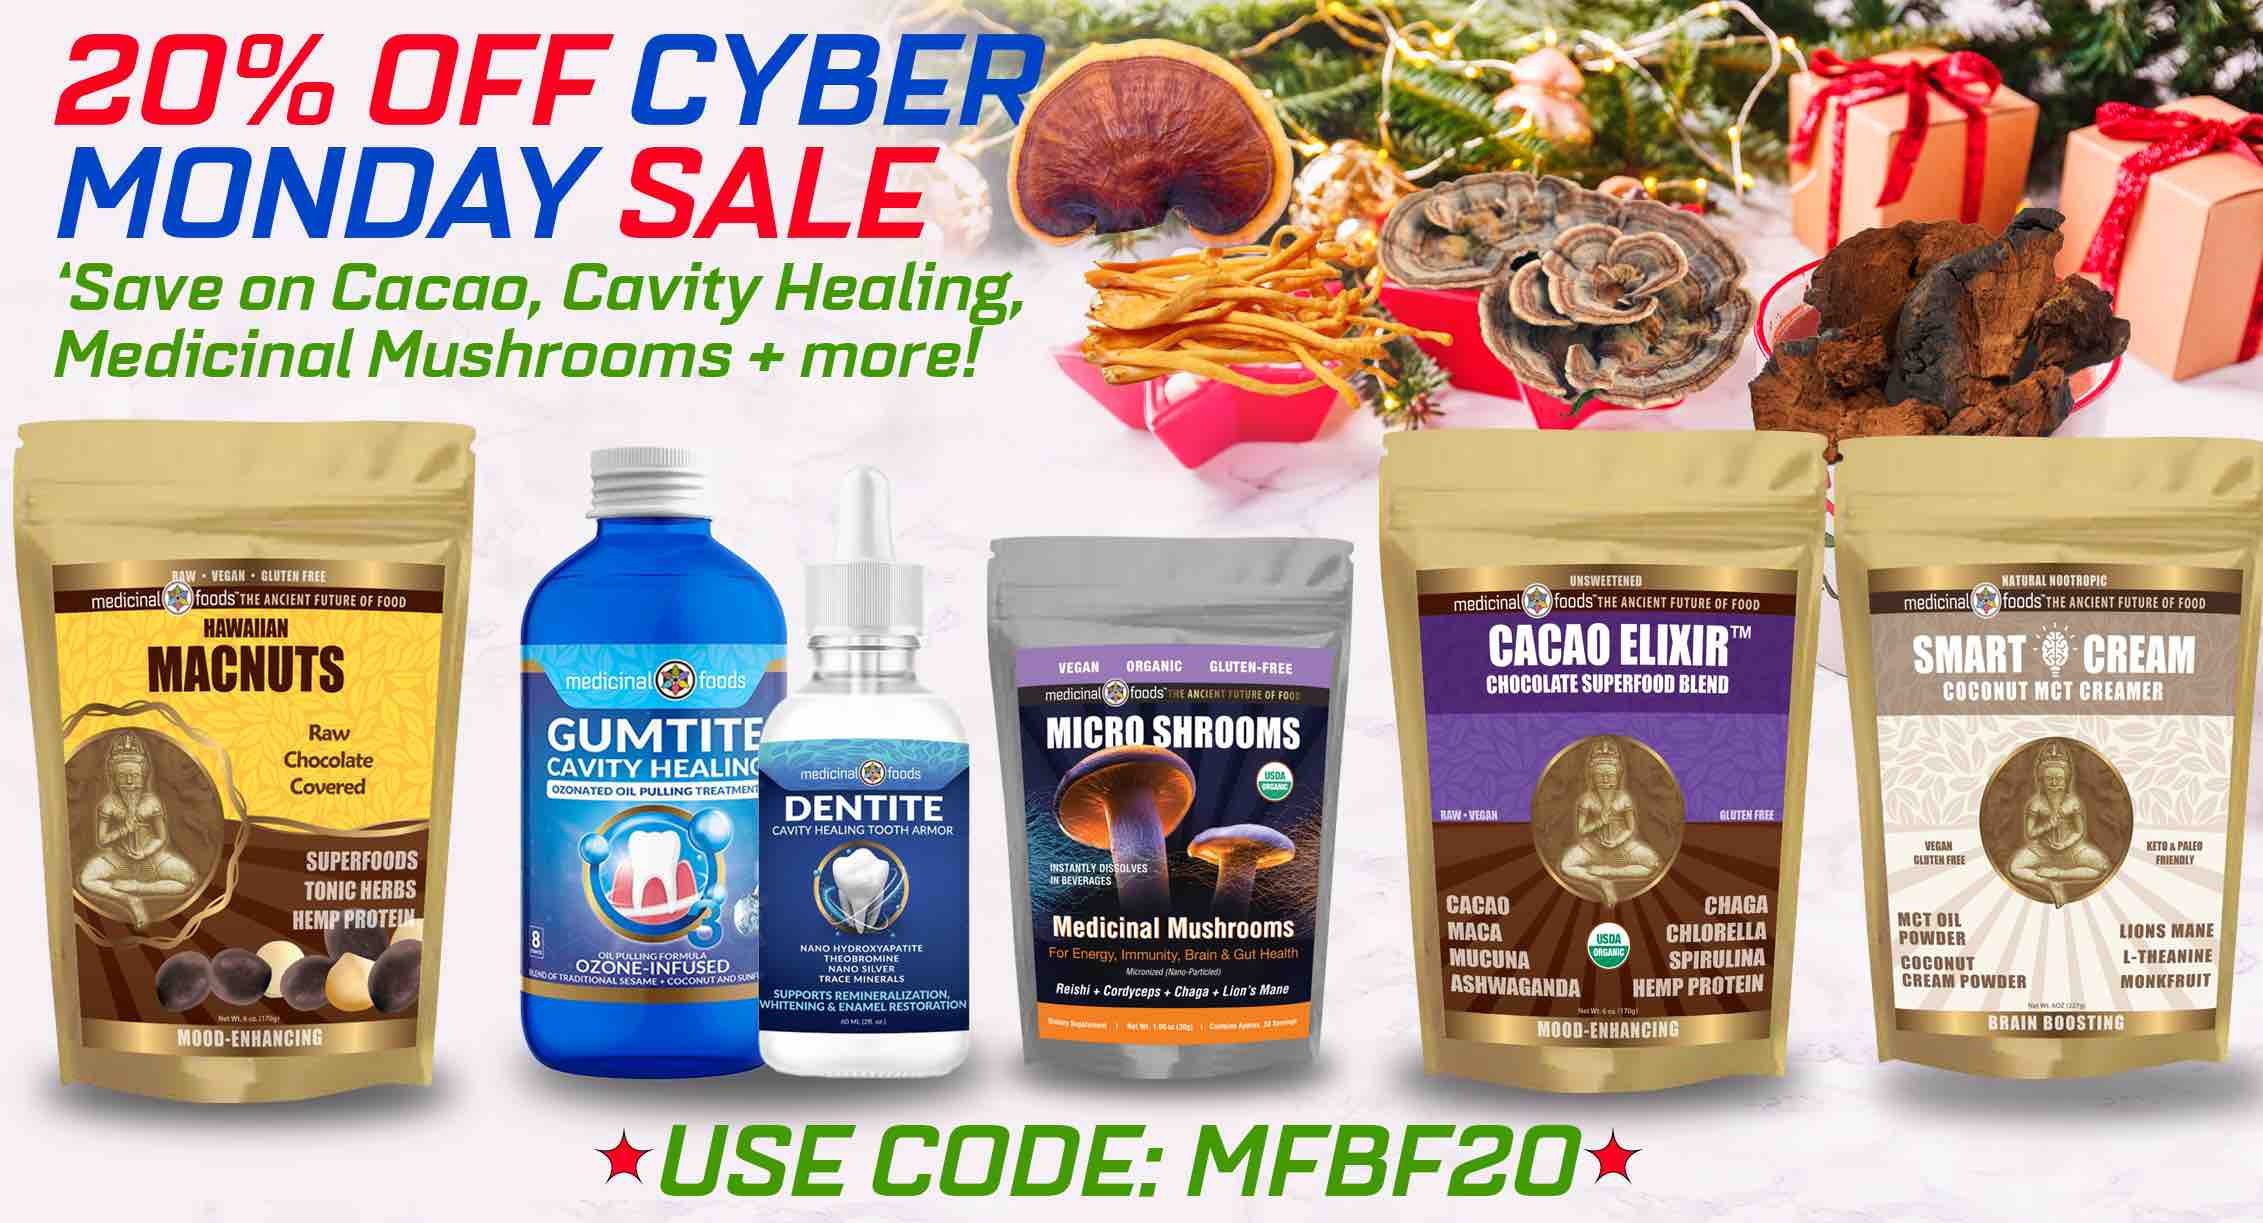 20% OFF MFBF20 Superfoods, Cyber Monday